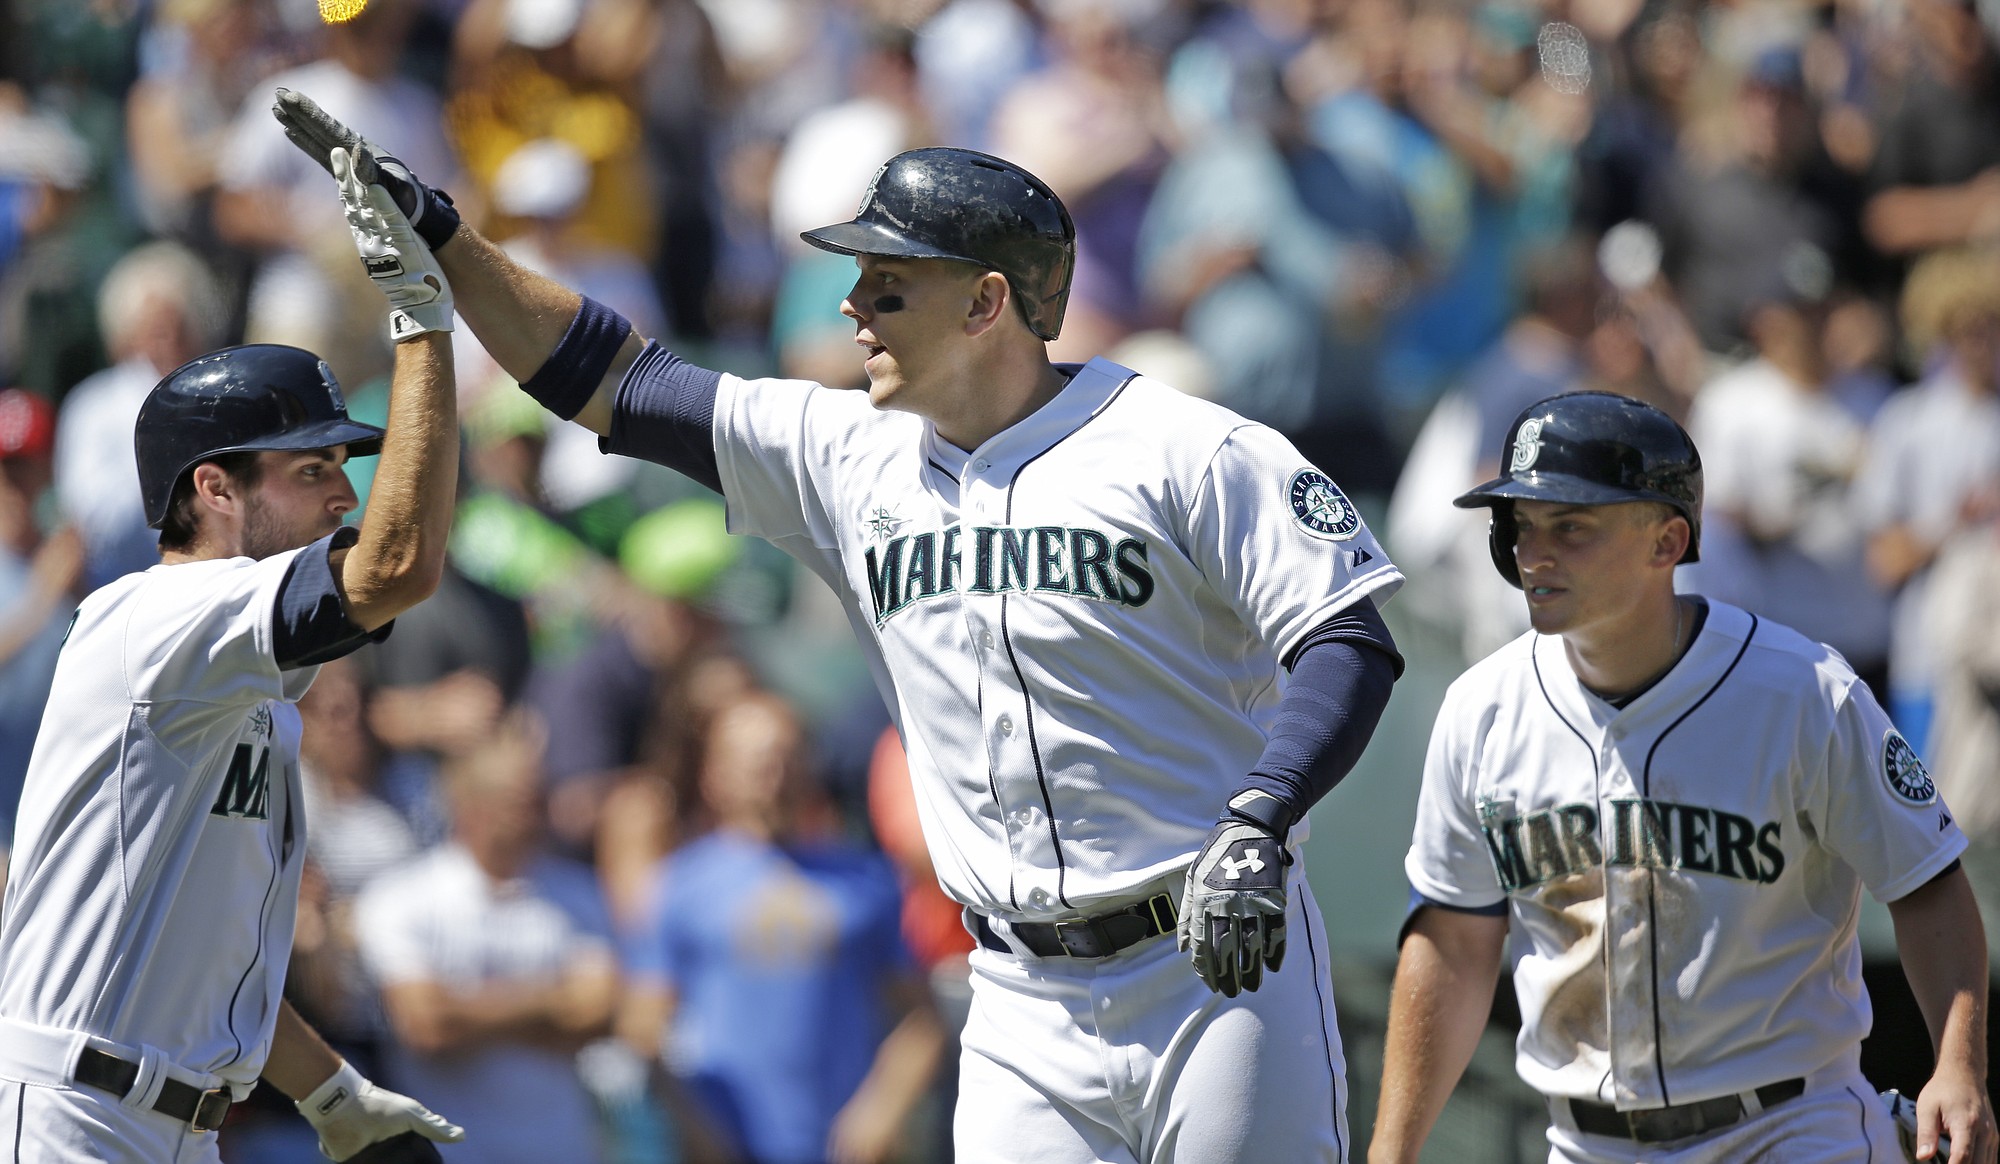 Seattle Mariners' Logan Morrison, center, is congratulated by Chris Taylor, left, and followed by Kyle Seager on Morrison's three-run home run against the Atlanta Braves in the third inning of a baseball game Wednesday, Aug. 6, 2014, in Seattle.